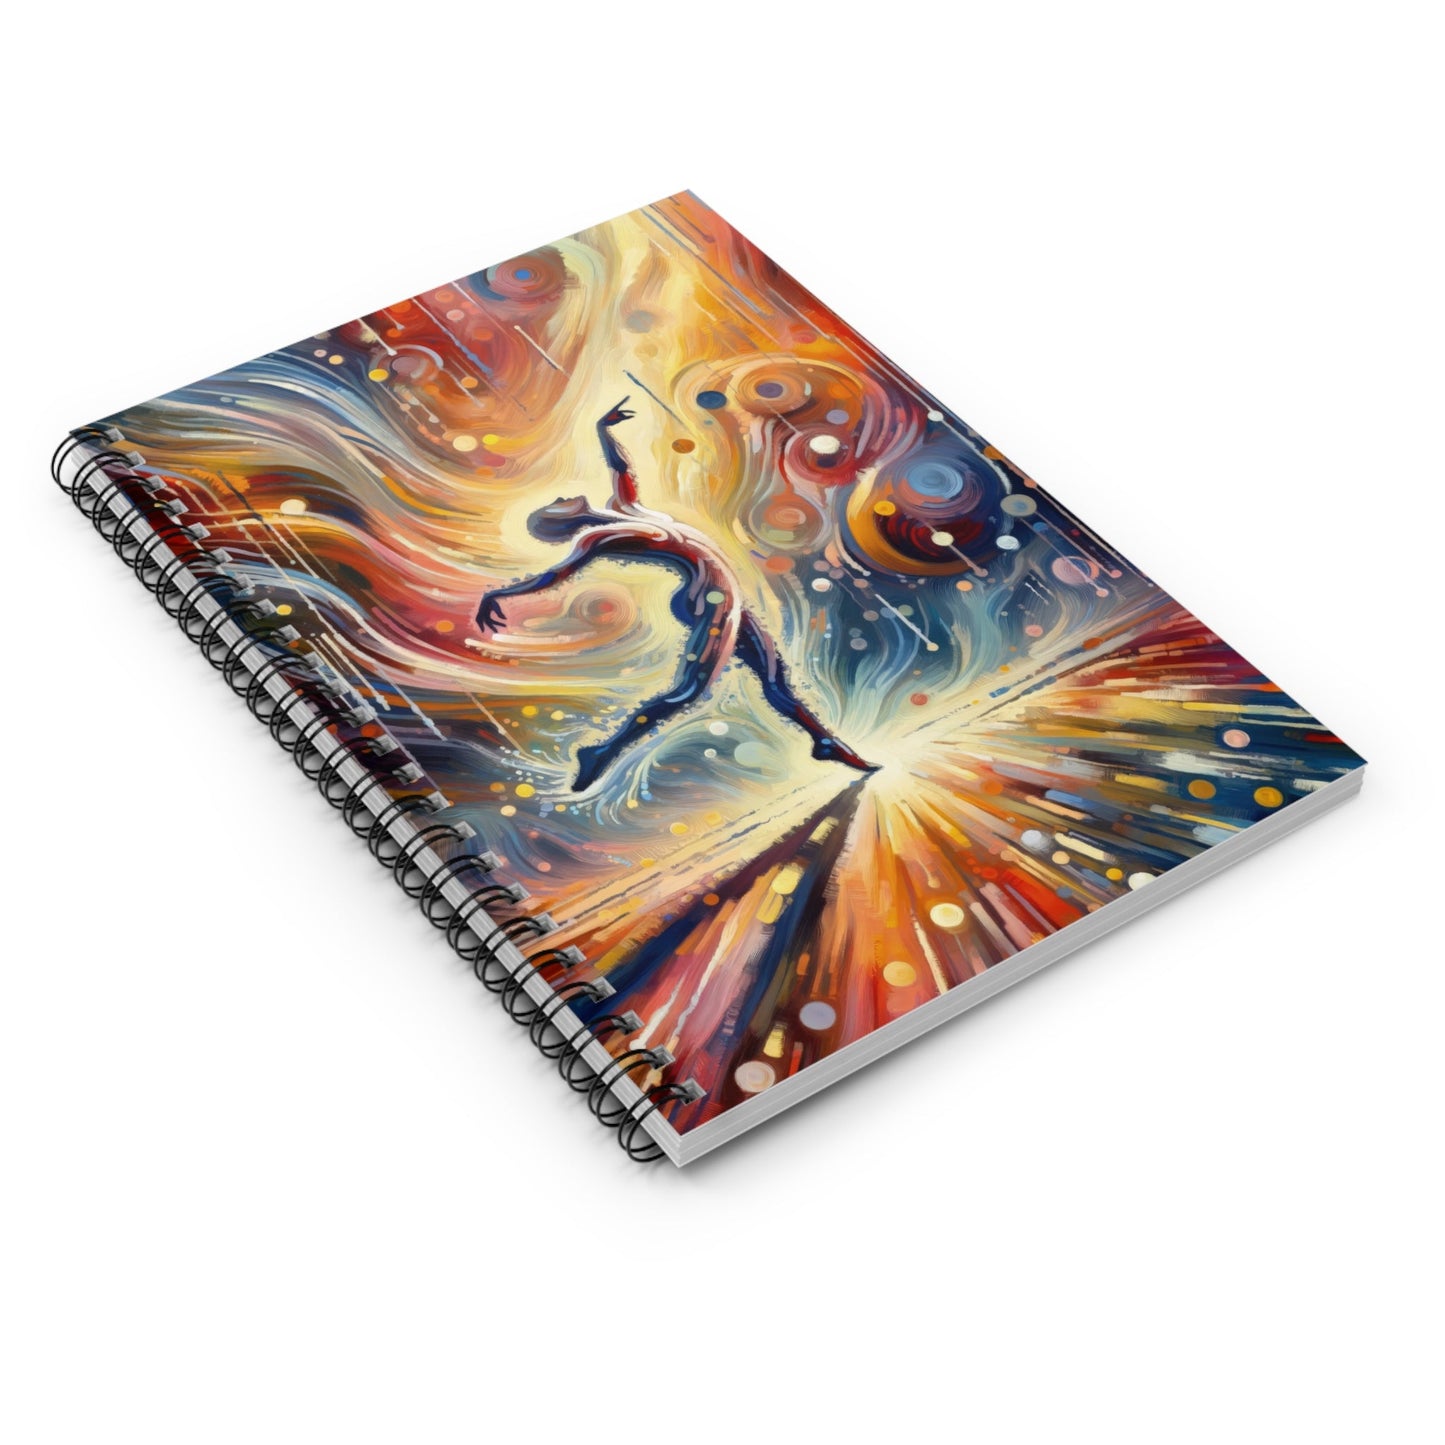 Wholehearted Divine Dance Spiral Notebook - Ruled Line - ATUH.ART